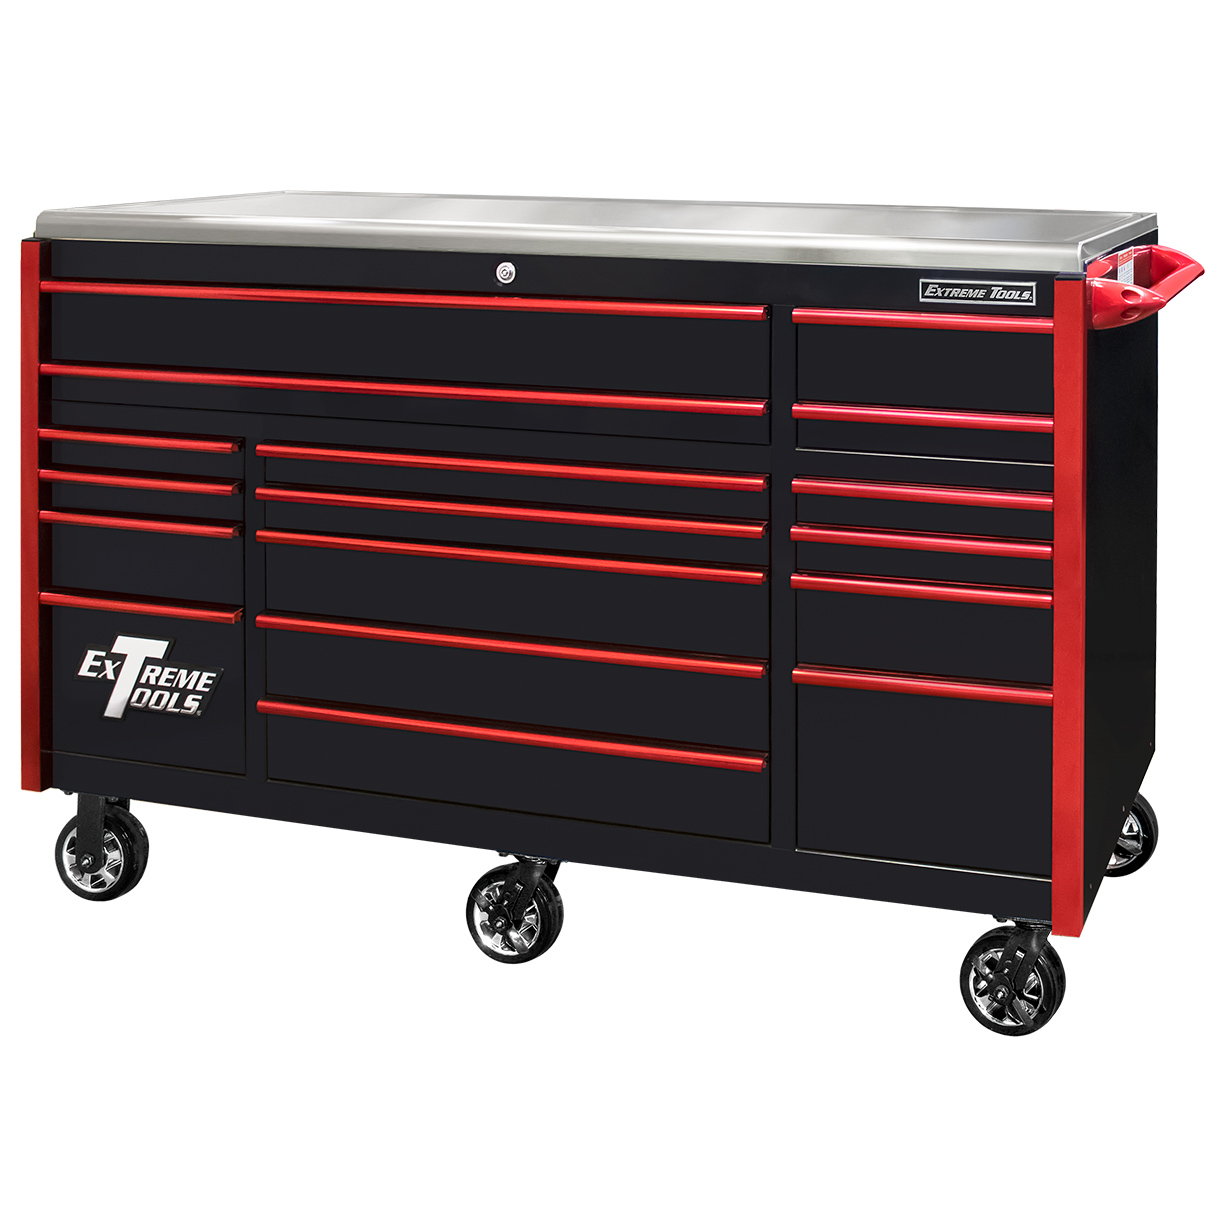 3 Count Toolbox Tool Chest Cylinder Lock for Storage Unit Desk